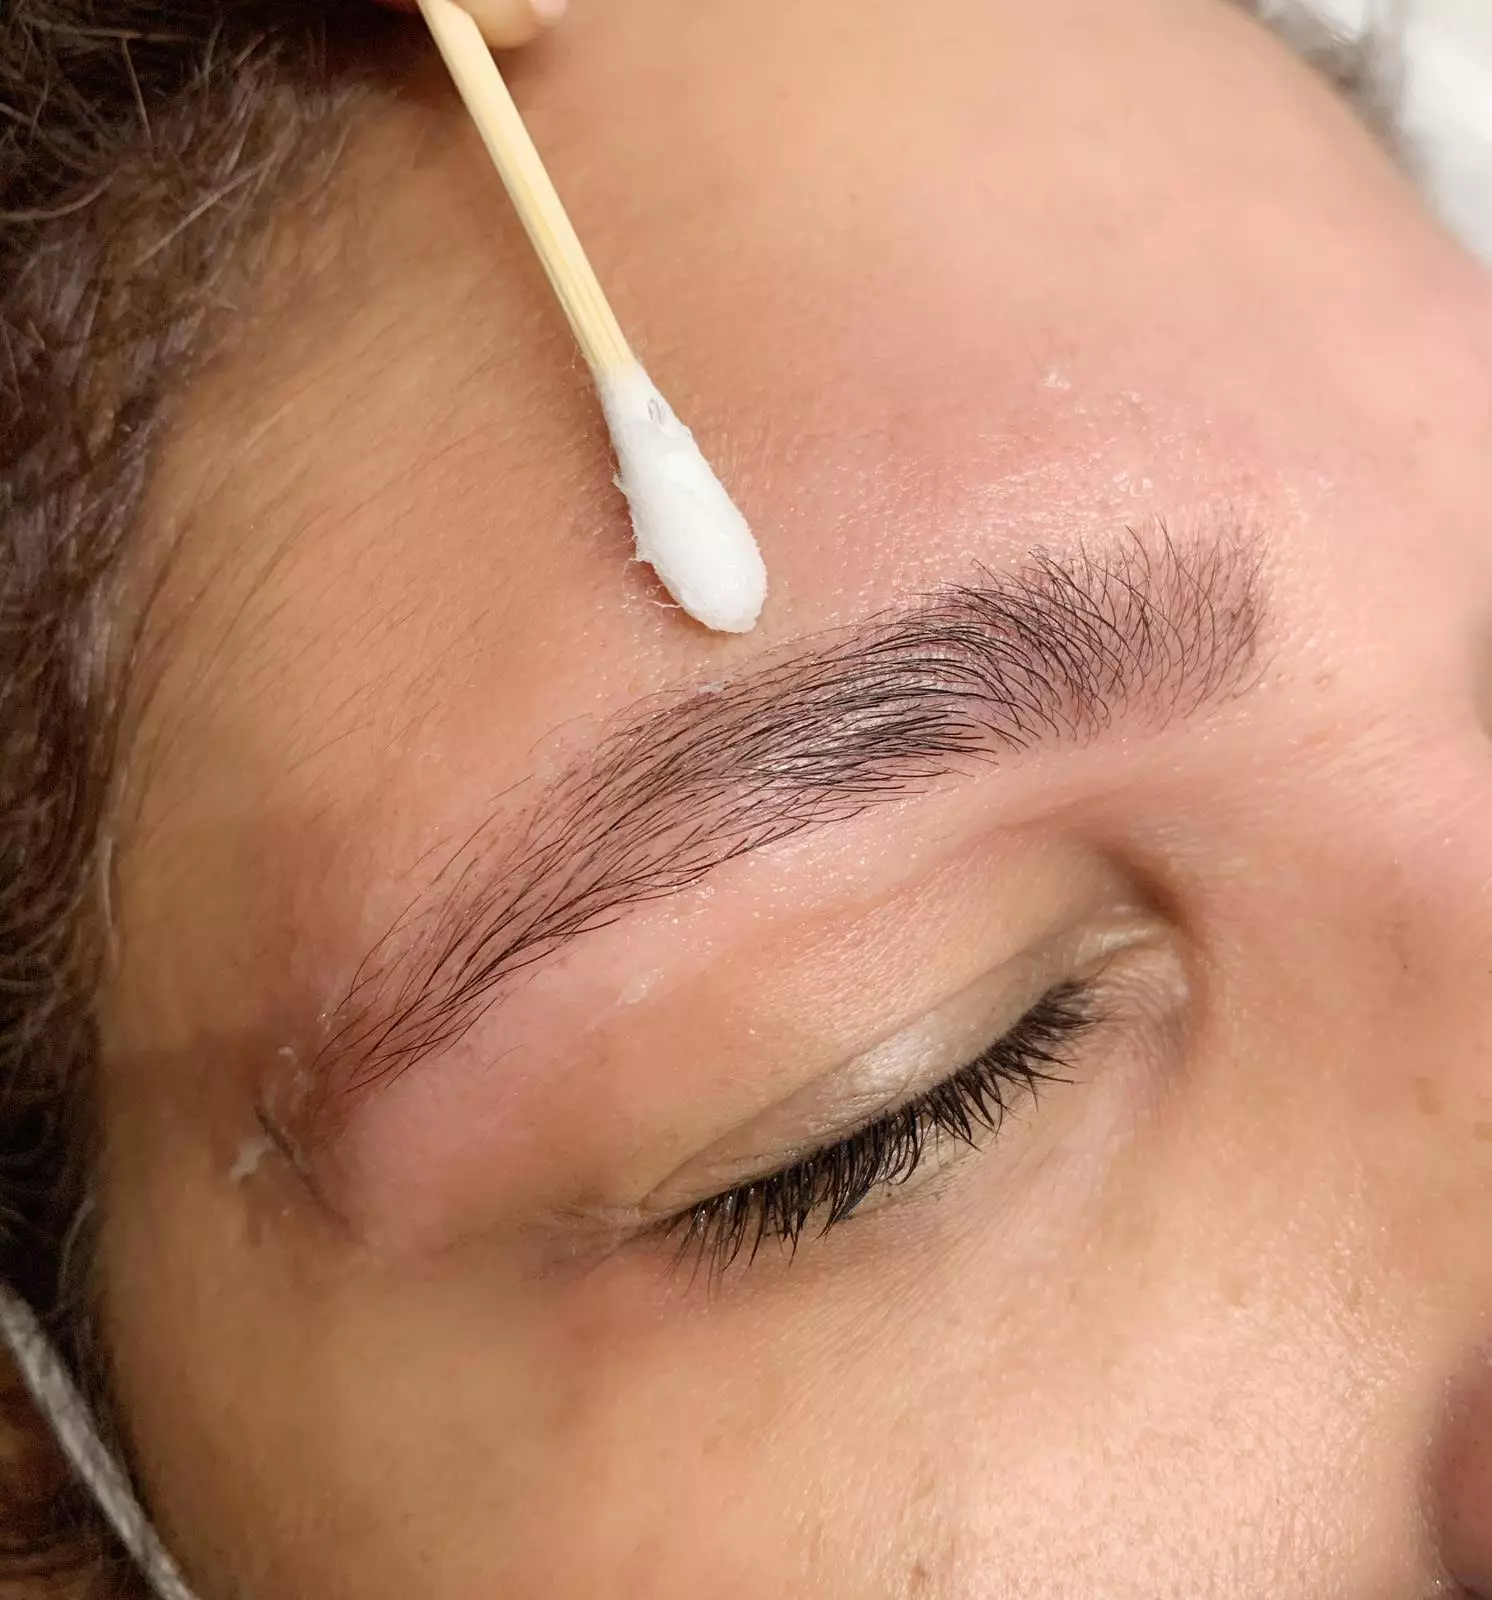 Apply a thin layer of vaseline above and below your brows to guard against staining (